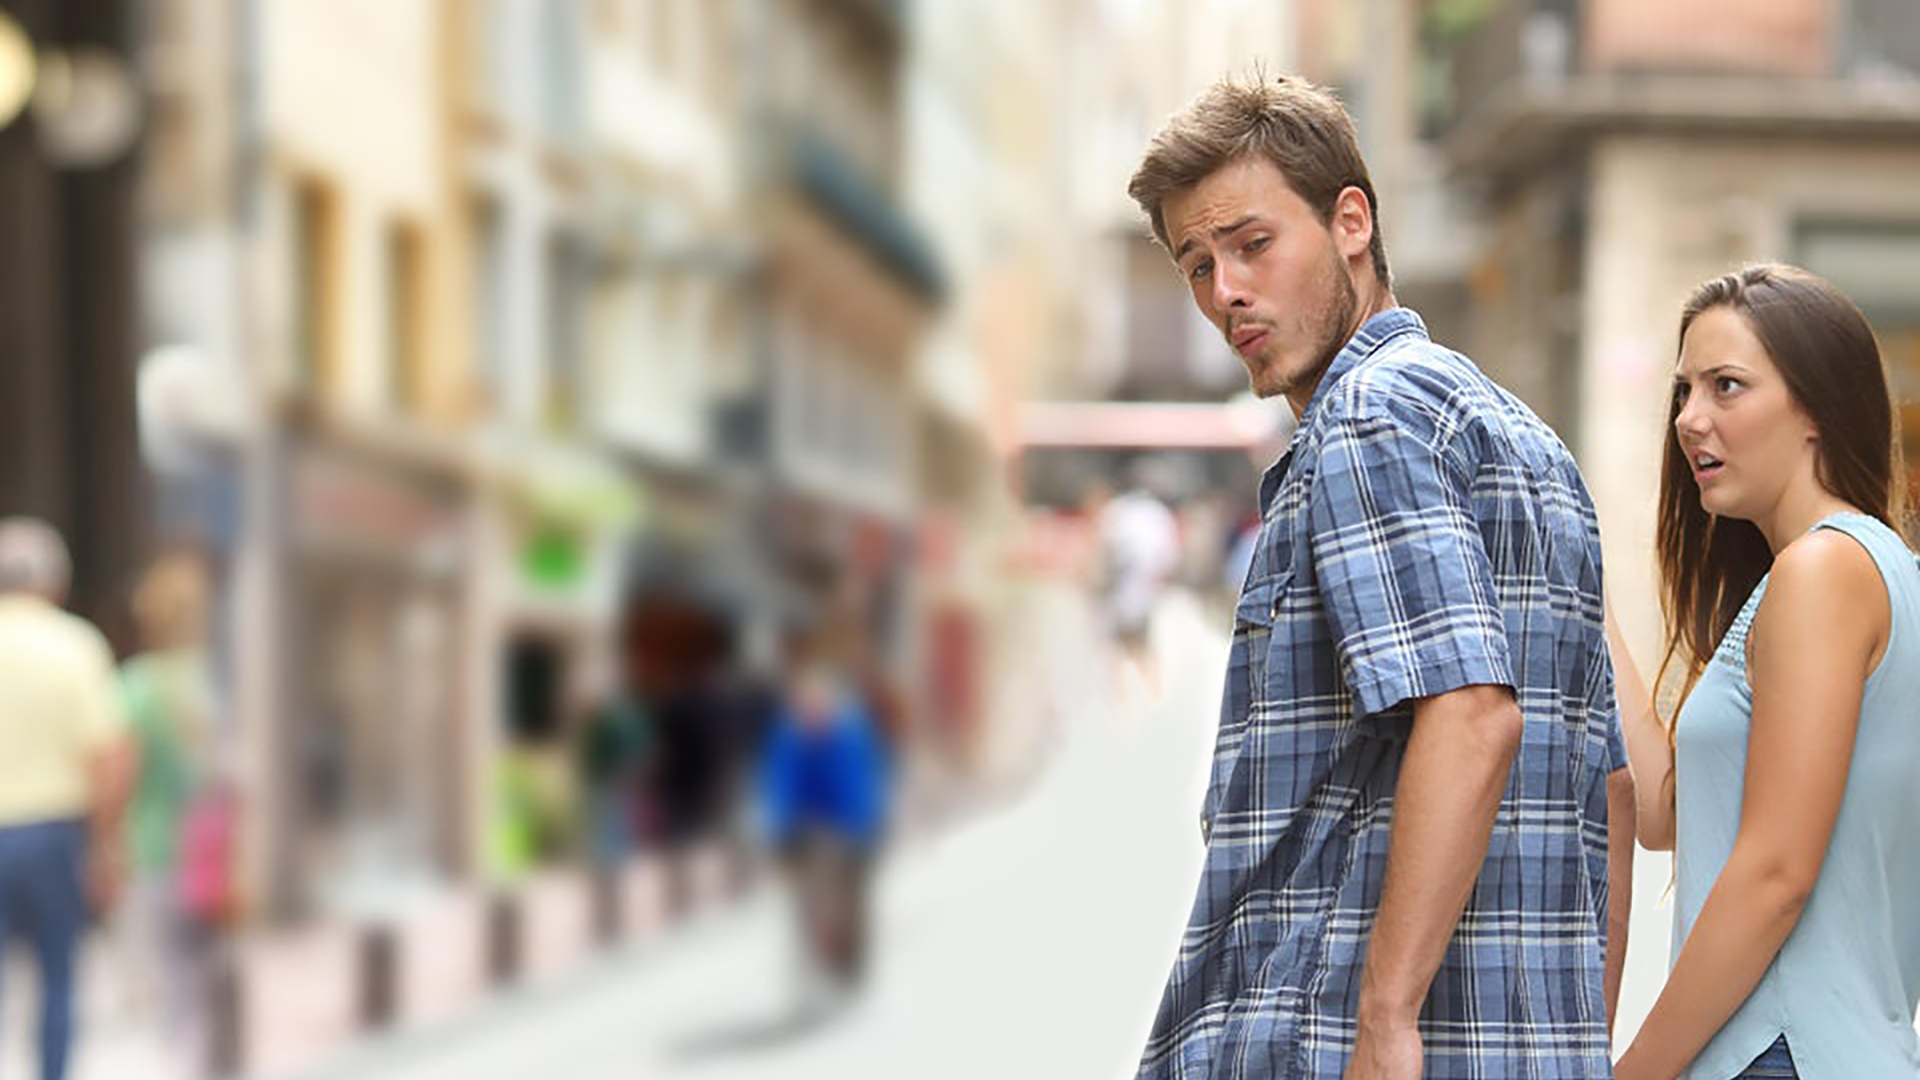 Distracted boyfriend meme. Virtual background to use on Zoom, Microsoft Teams, Skype, Google Meet, WebEx or any other compatible app.